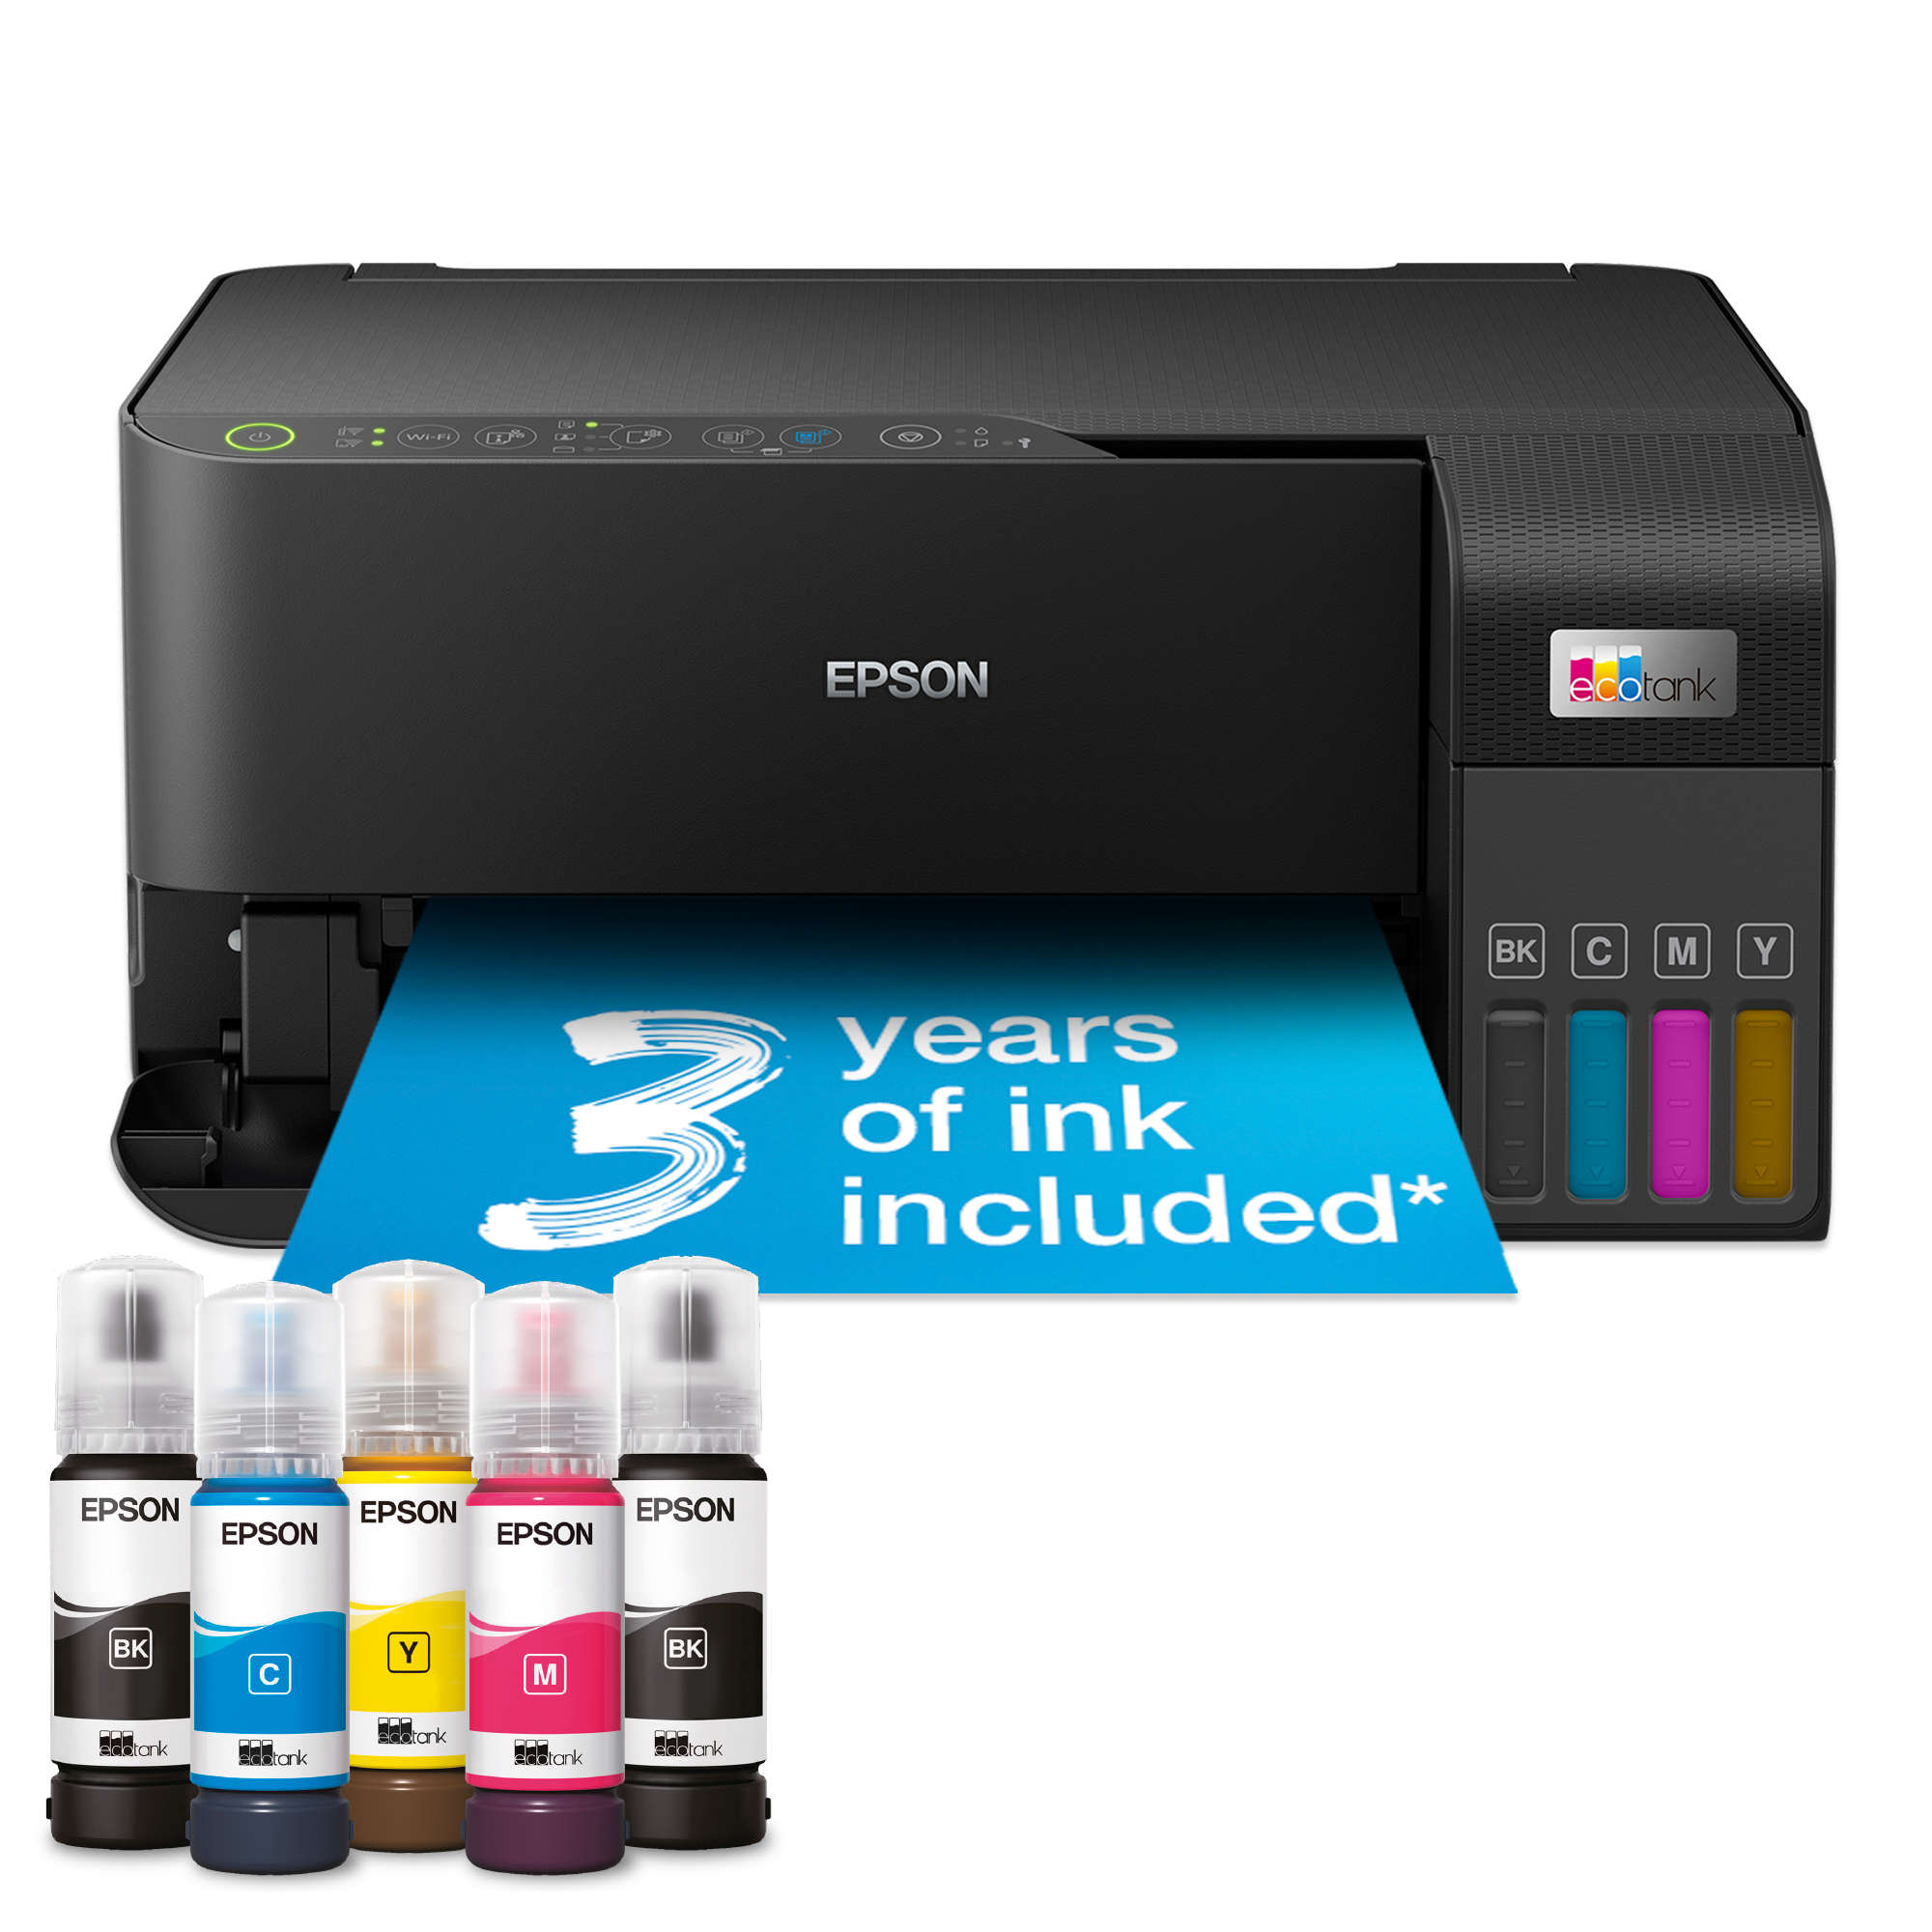 Product  Epson Expression Home XP-5205 - multifunction printer - colour